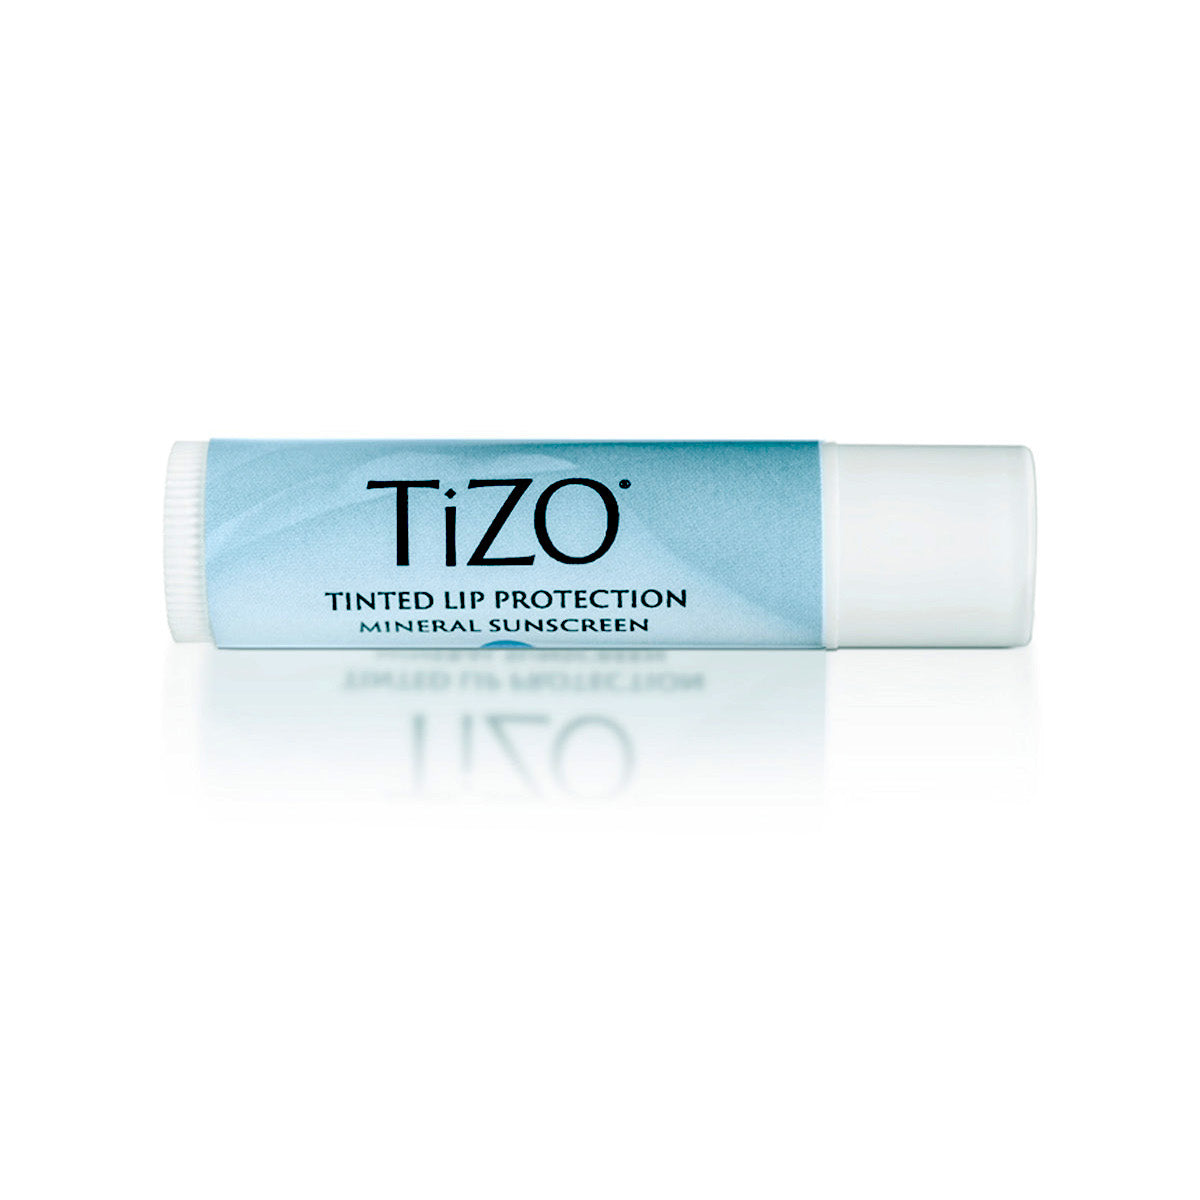 https://sophiescosmetics.com/products/tizo-tinted-lip-protection-spf-45-0-14-oz